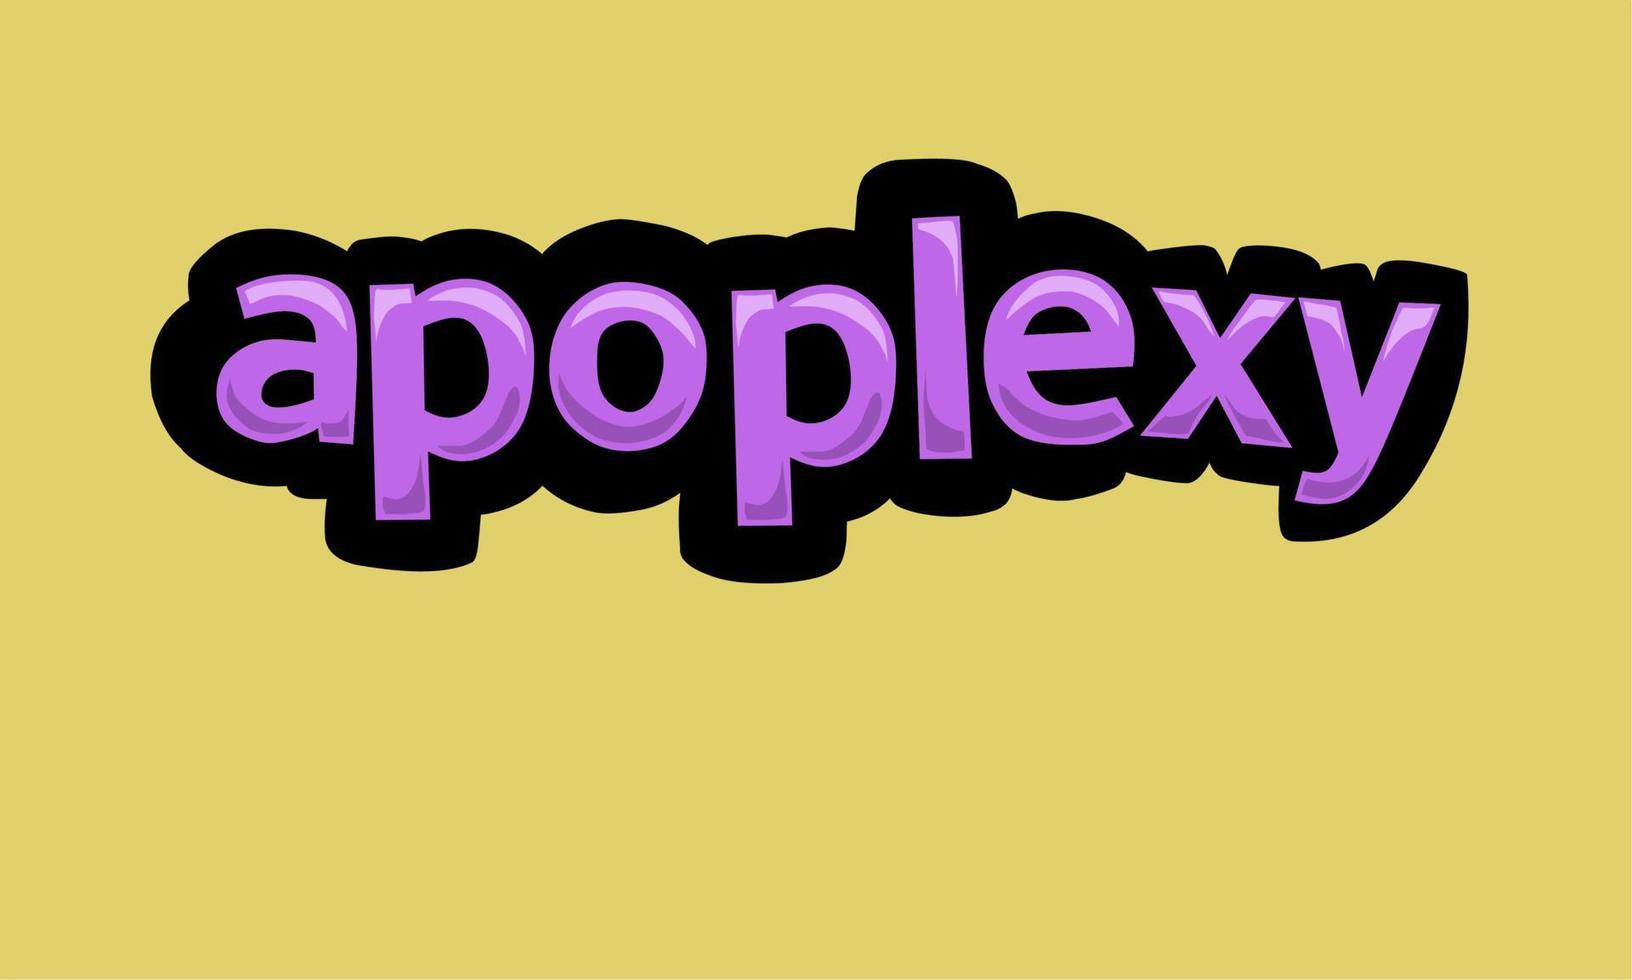 APOPLEXY writing vector design on a yellow background